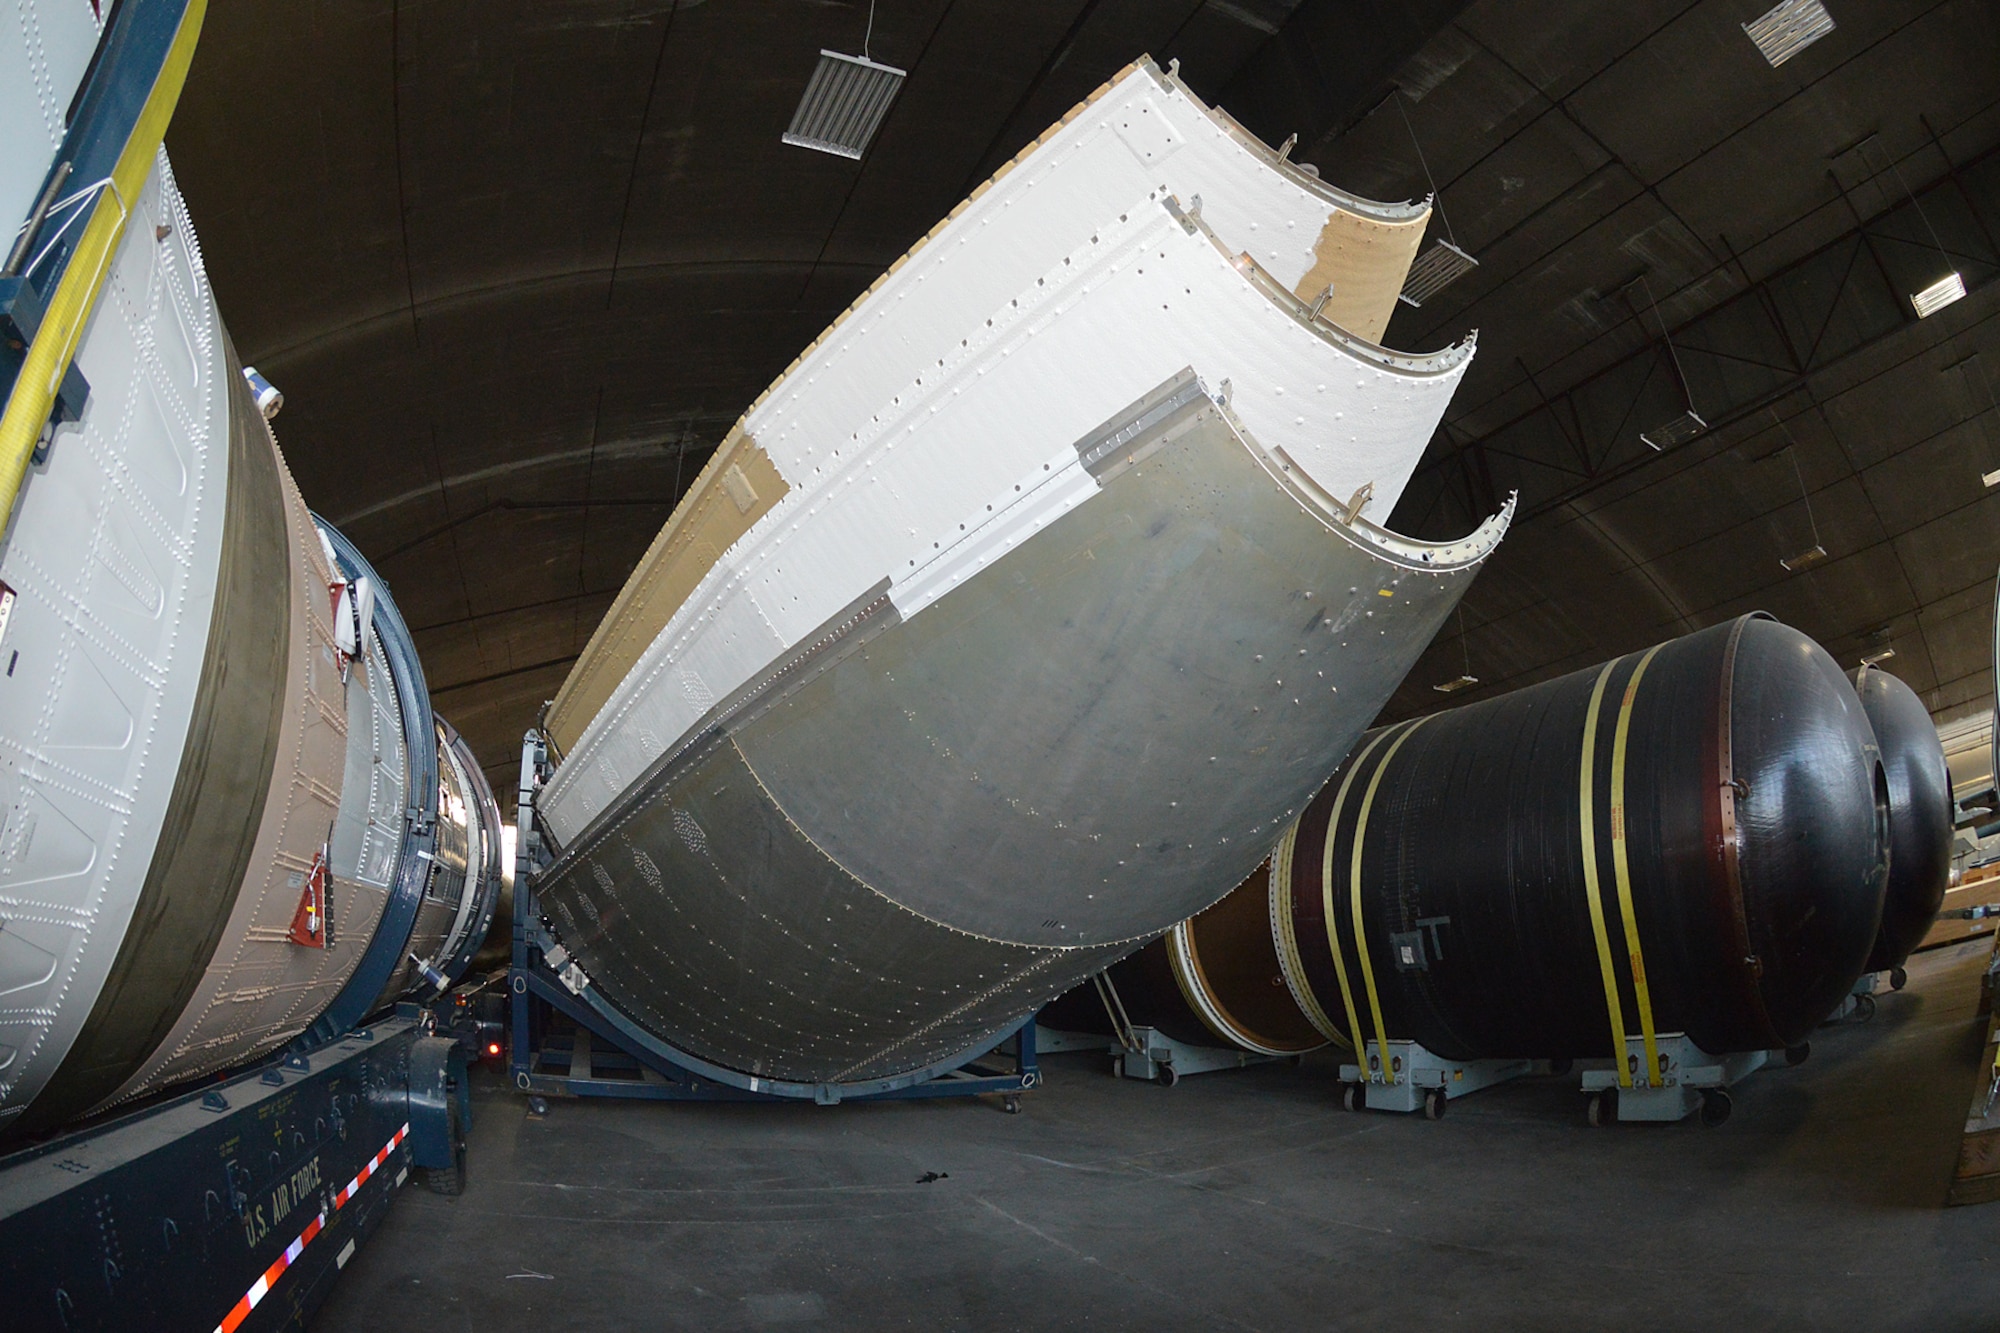 DAYTON, Ohio (08/2014) -- The Titan IVB space launch vehicle in the restoration hangar at the National Museum of the United States Air Force. These are sections of the payload fairings. (U.S. Air Force photo)